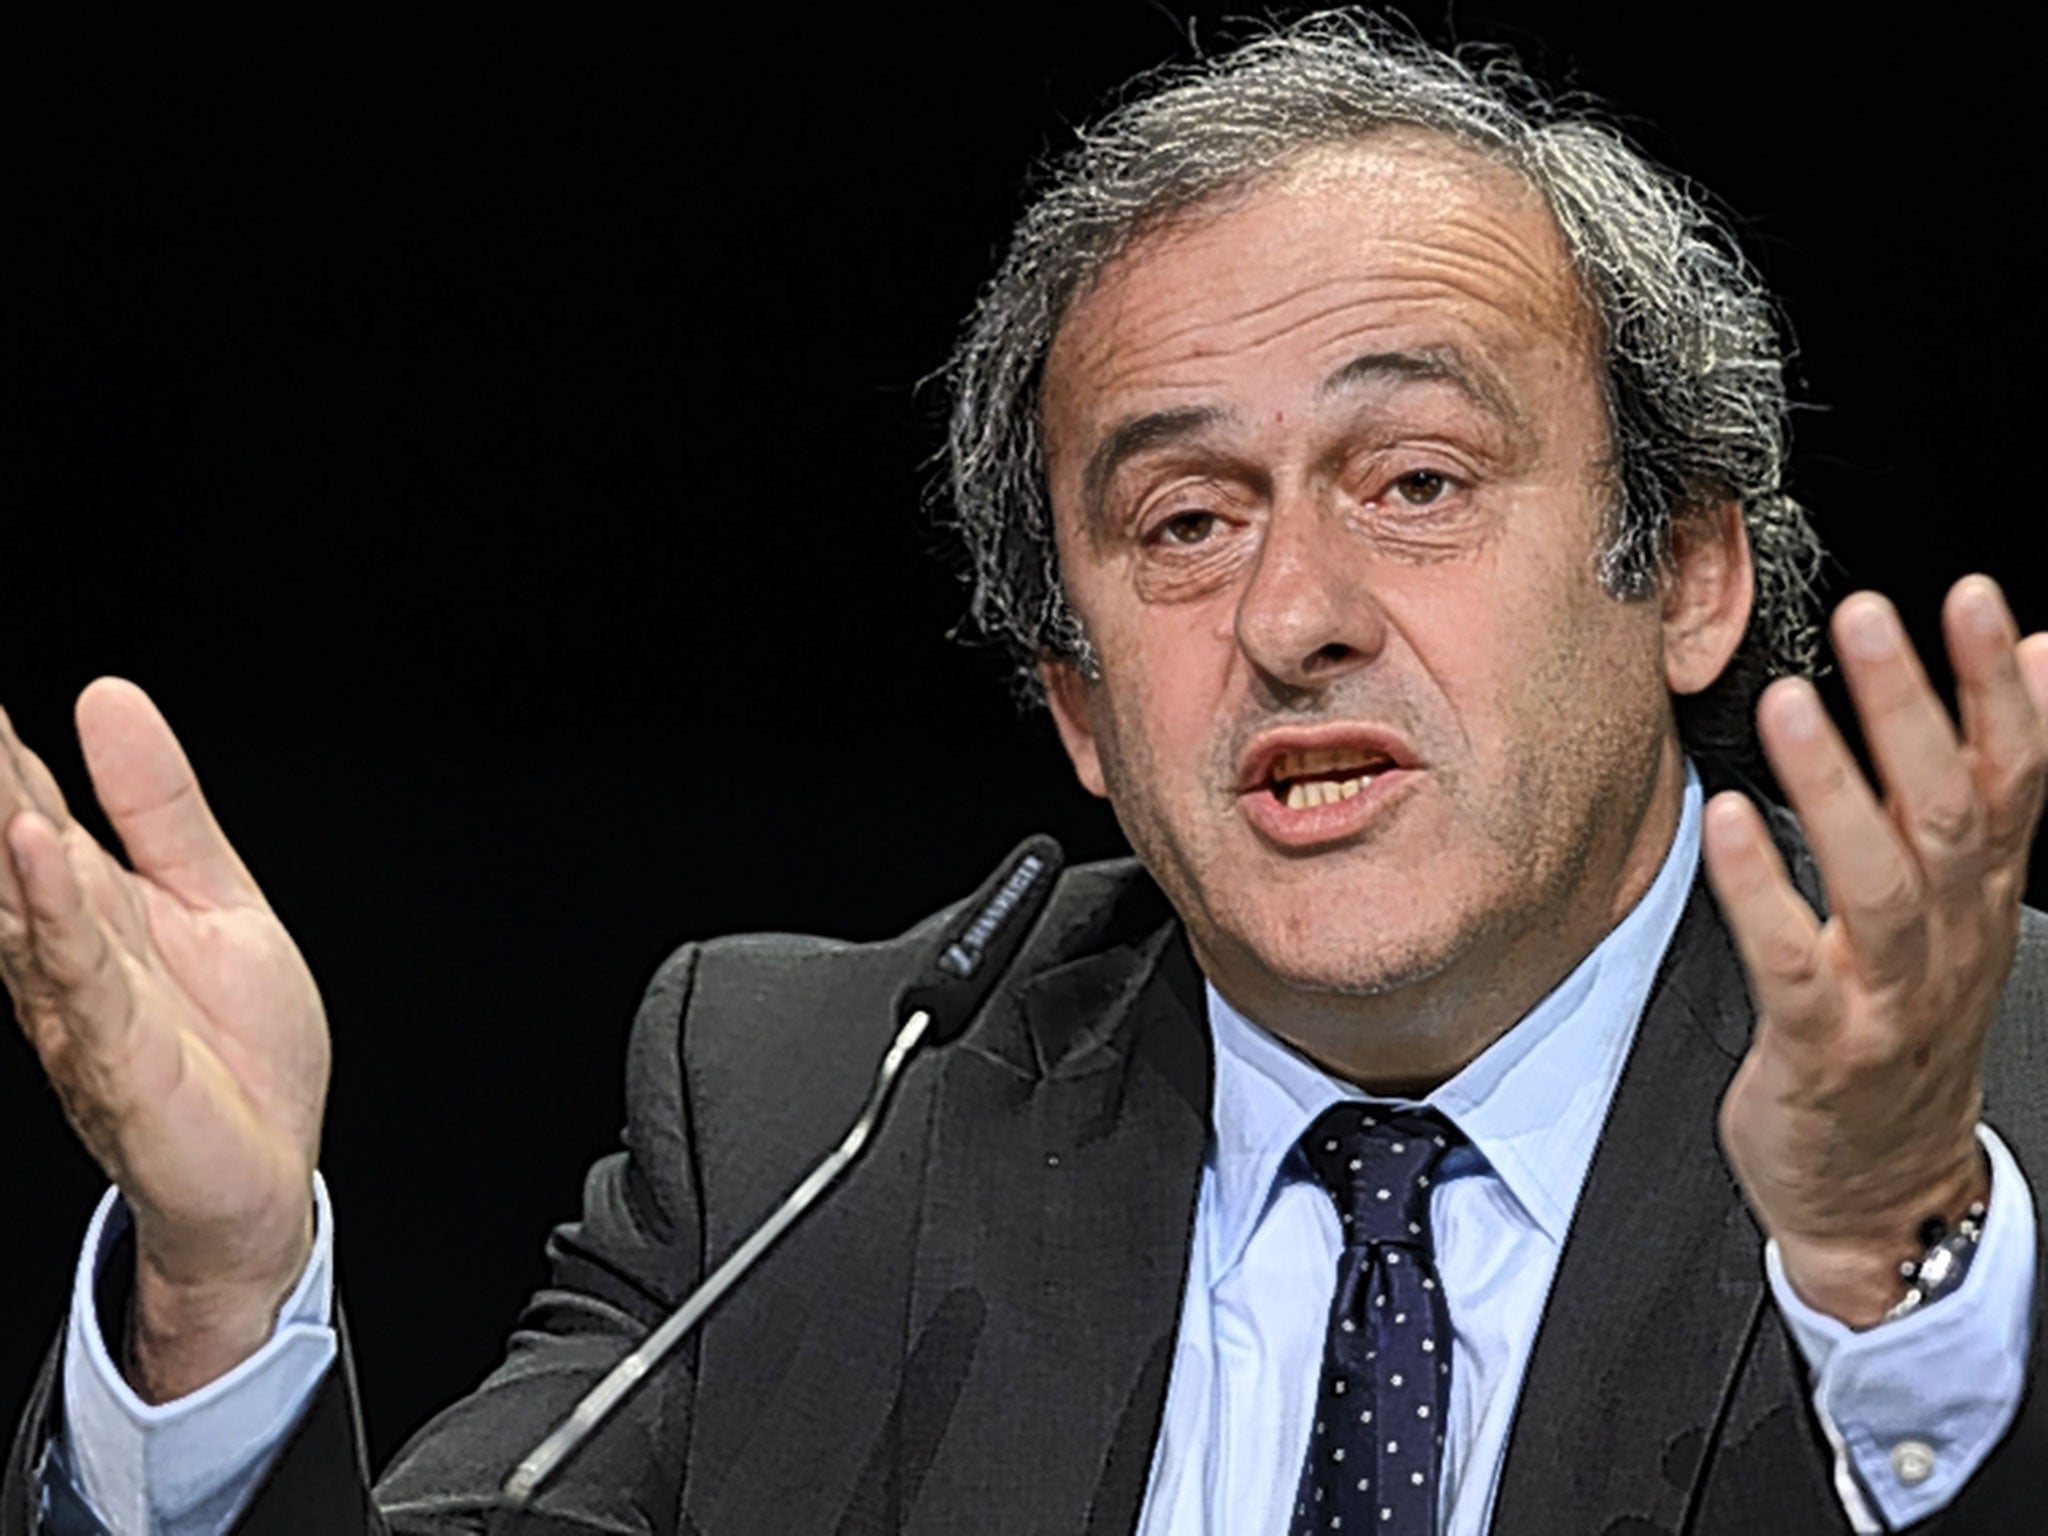 Michel Platini says the allegations against him are ‘based on mere semblances’